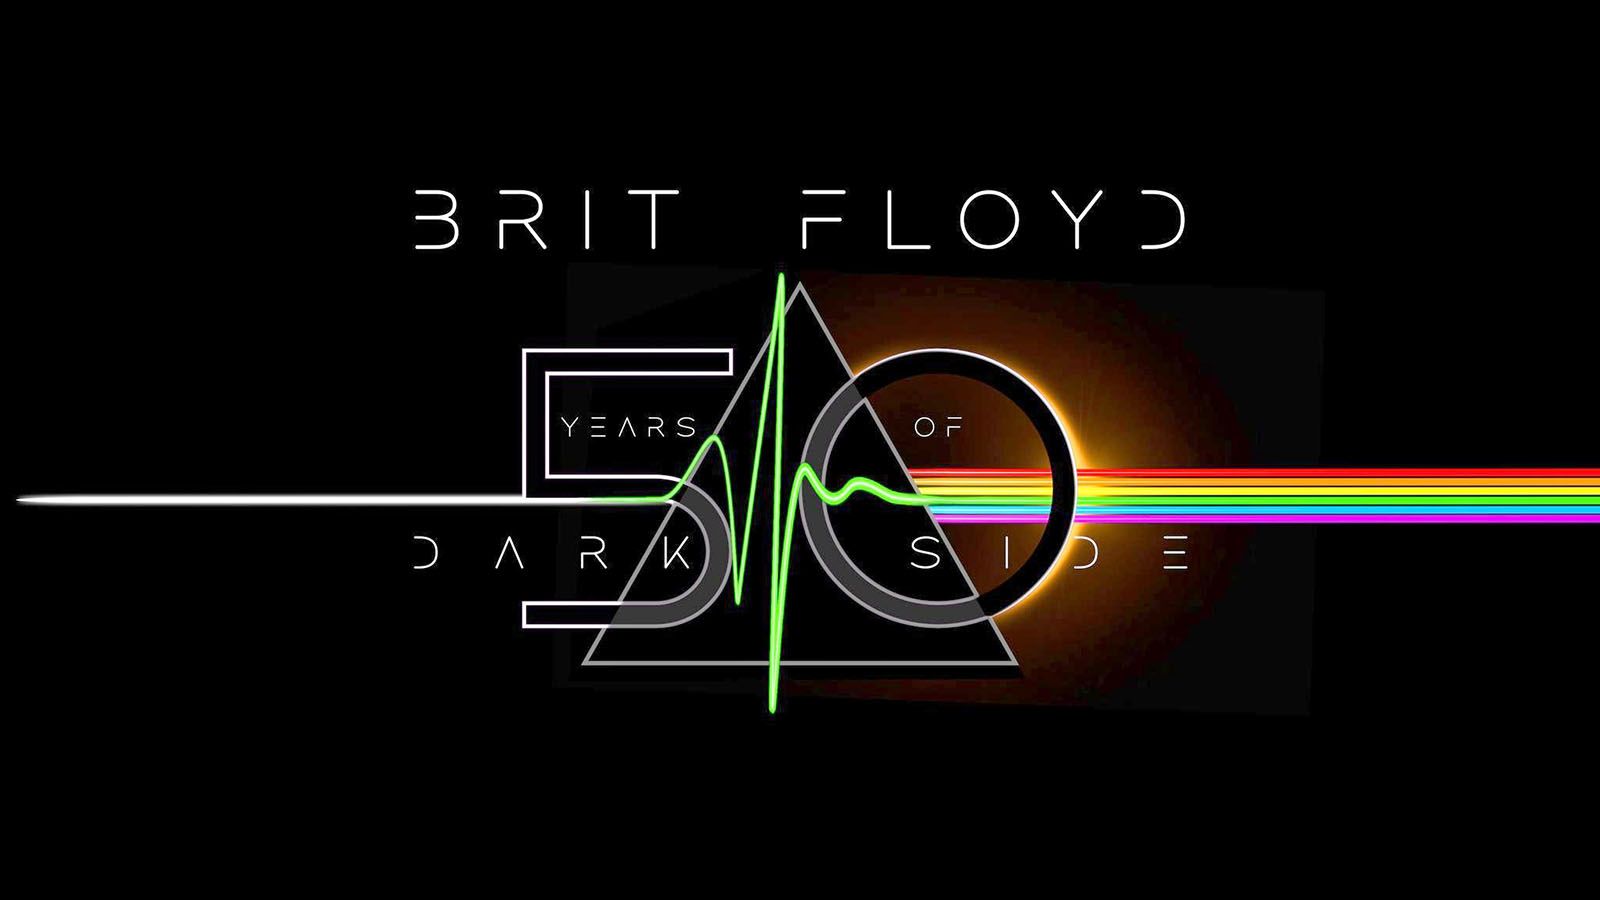 Pink Floyd tribute act Brit Floyd will be at The Clyde on Sunday, Nov. 12.